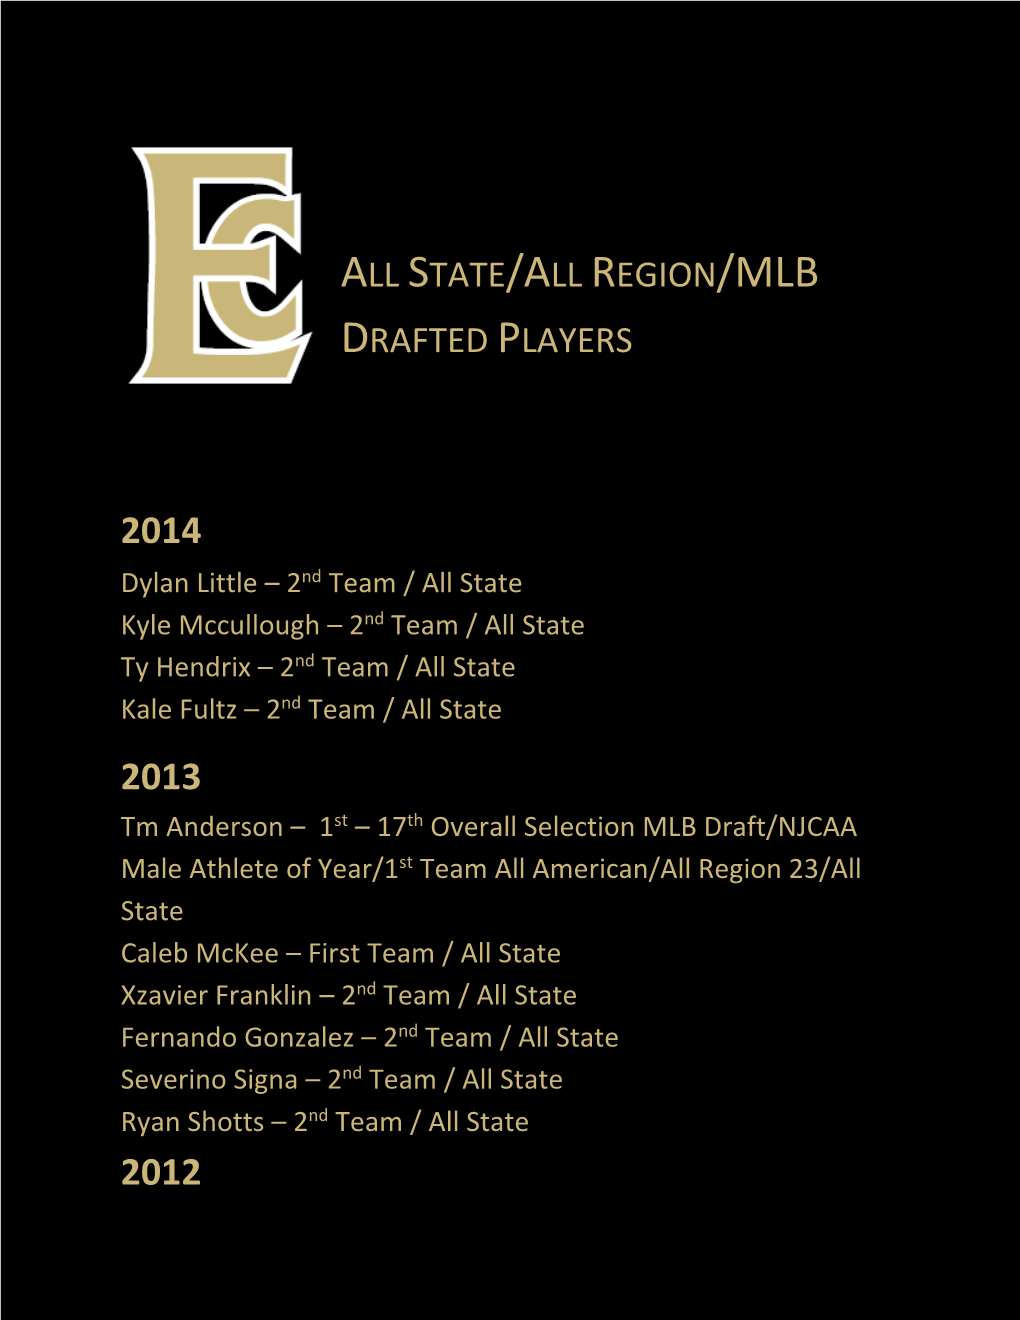 All State/All Region/Mlb Drafted Players